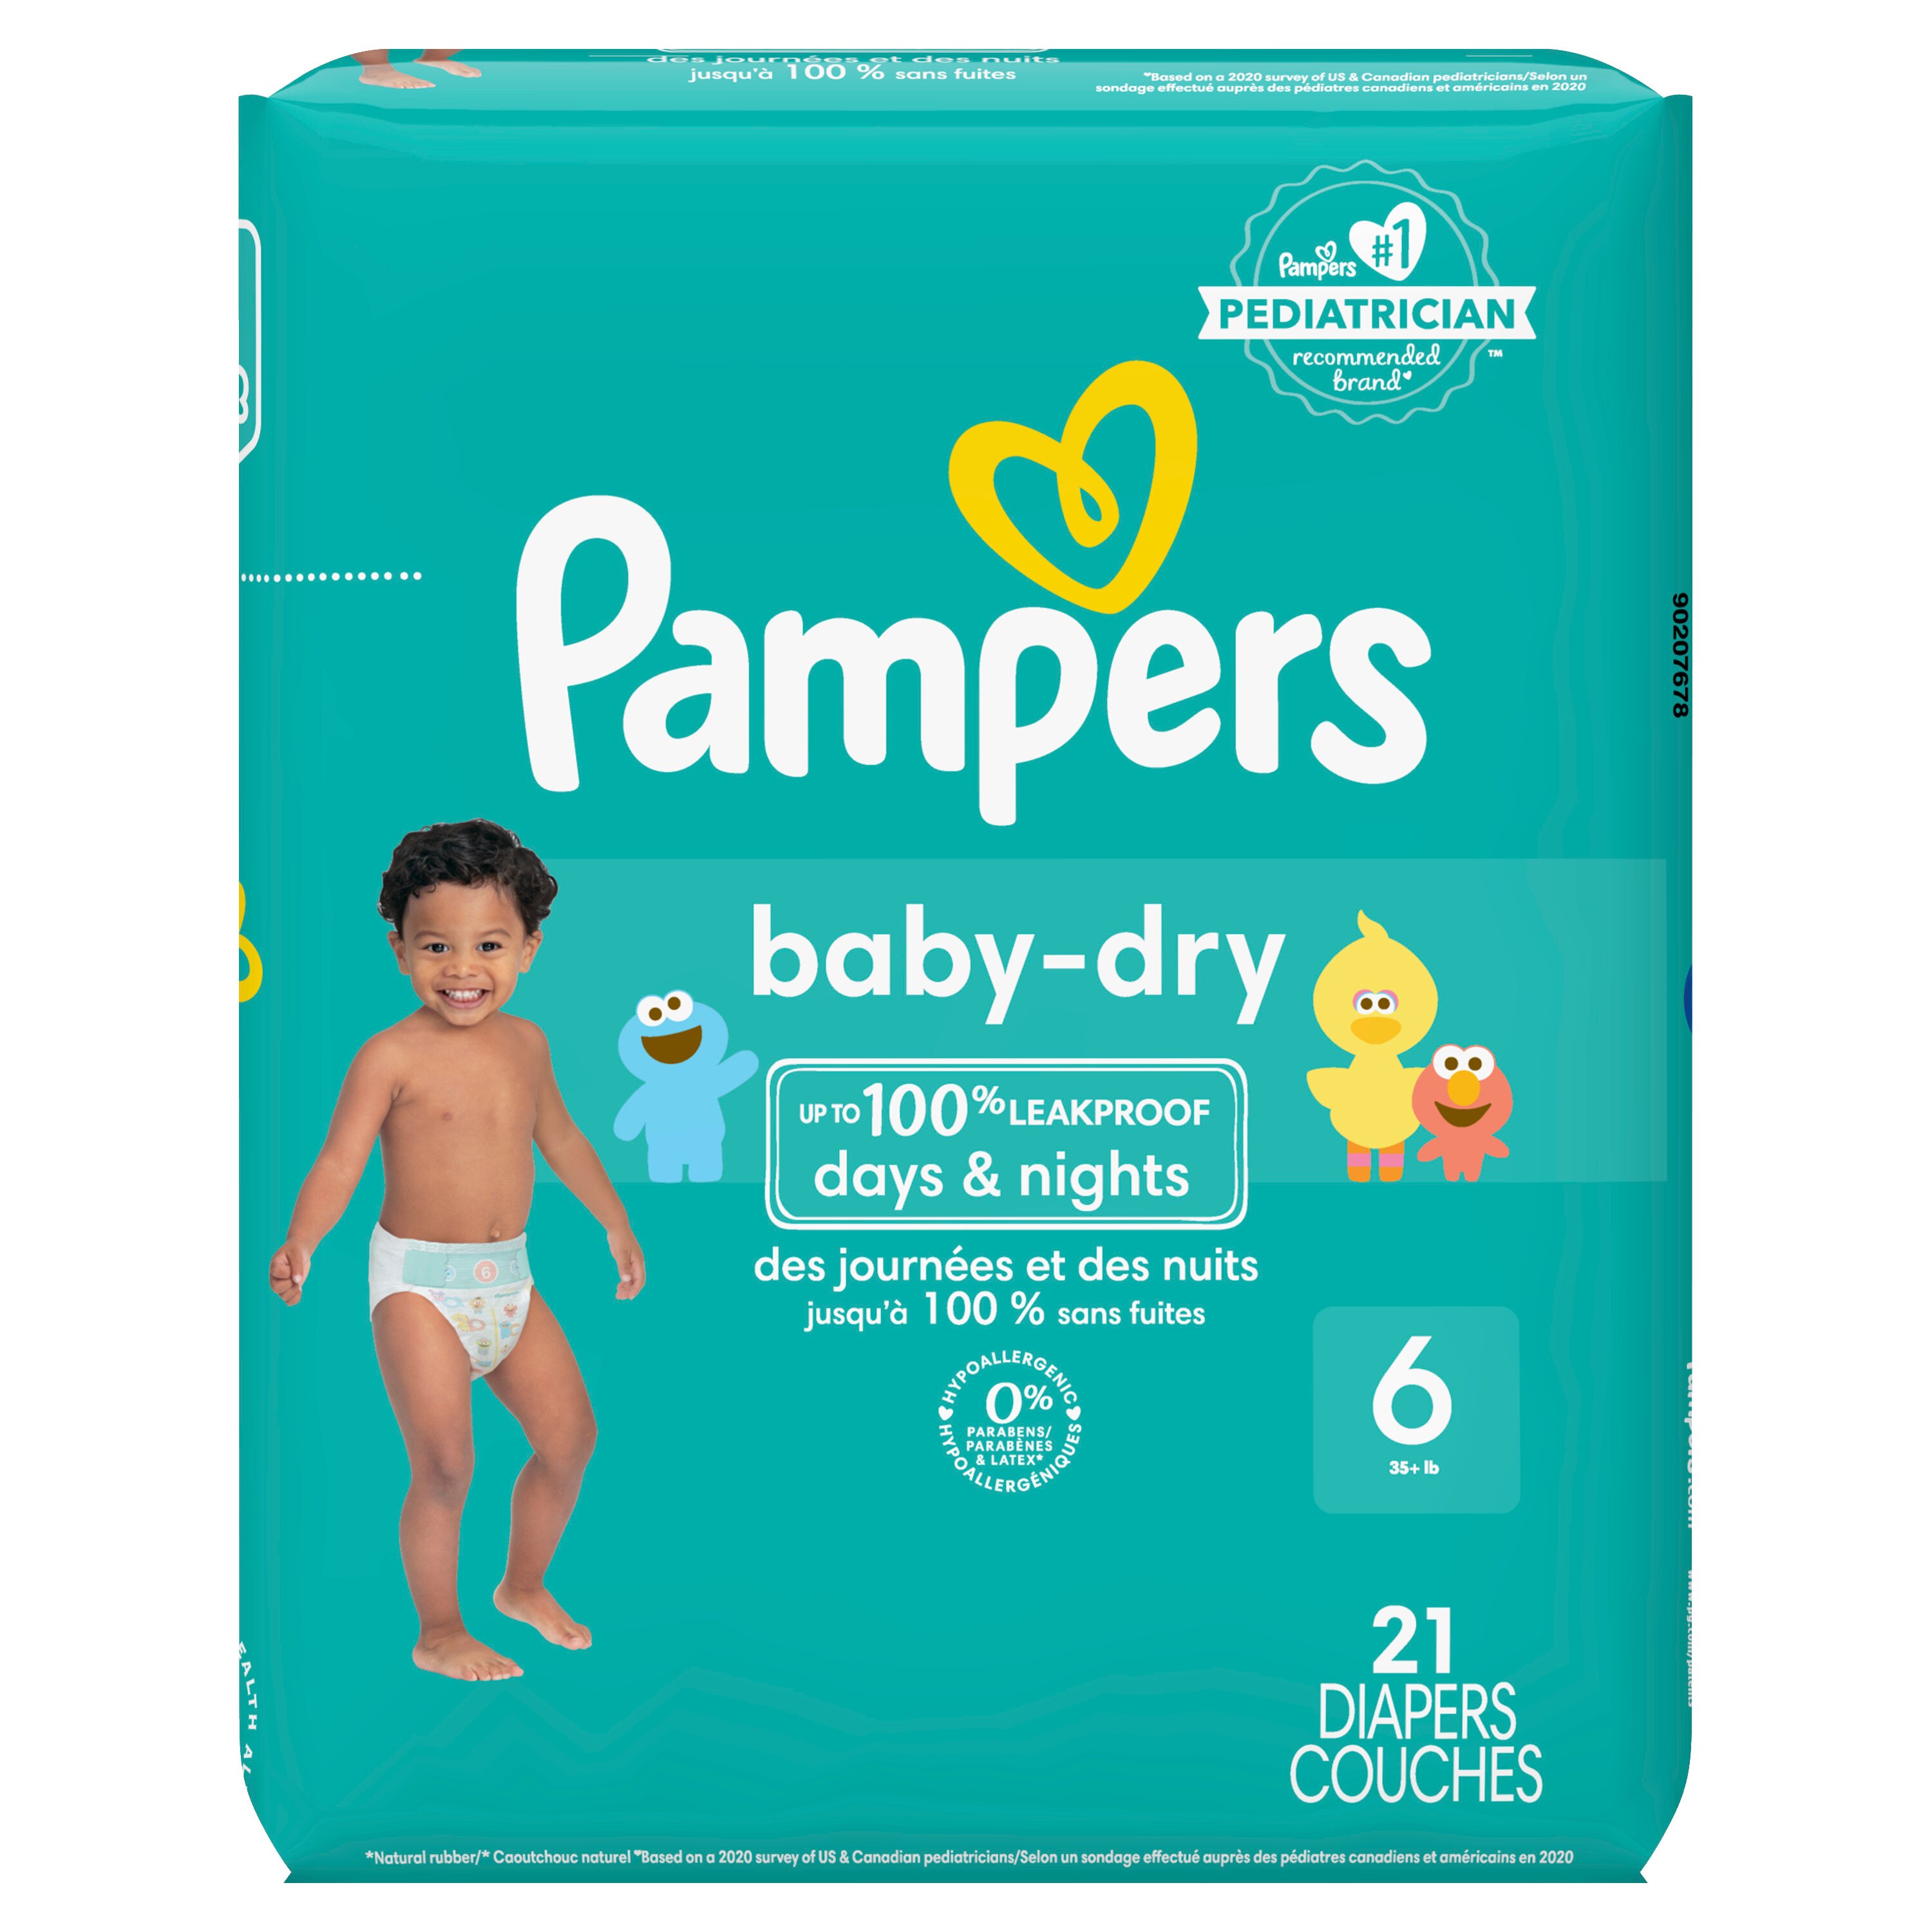 Reis Mars Vegetatie Pampers Baby Dry Pack Diapers | Pick Up In Store TODAY at CVS